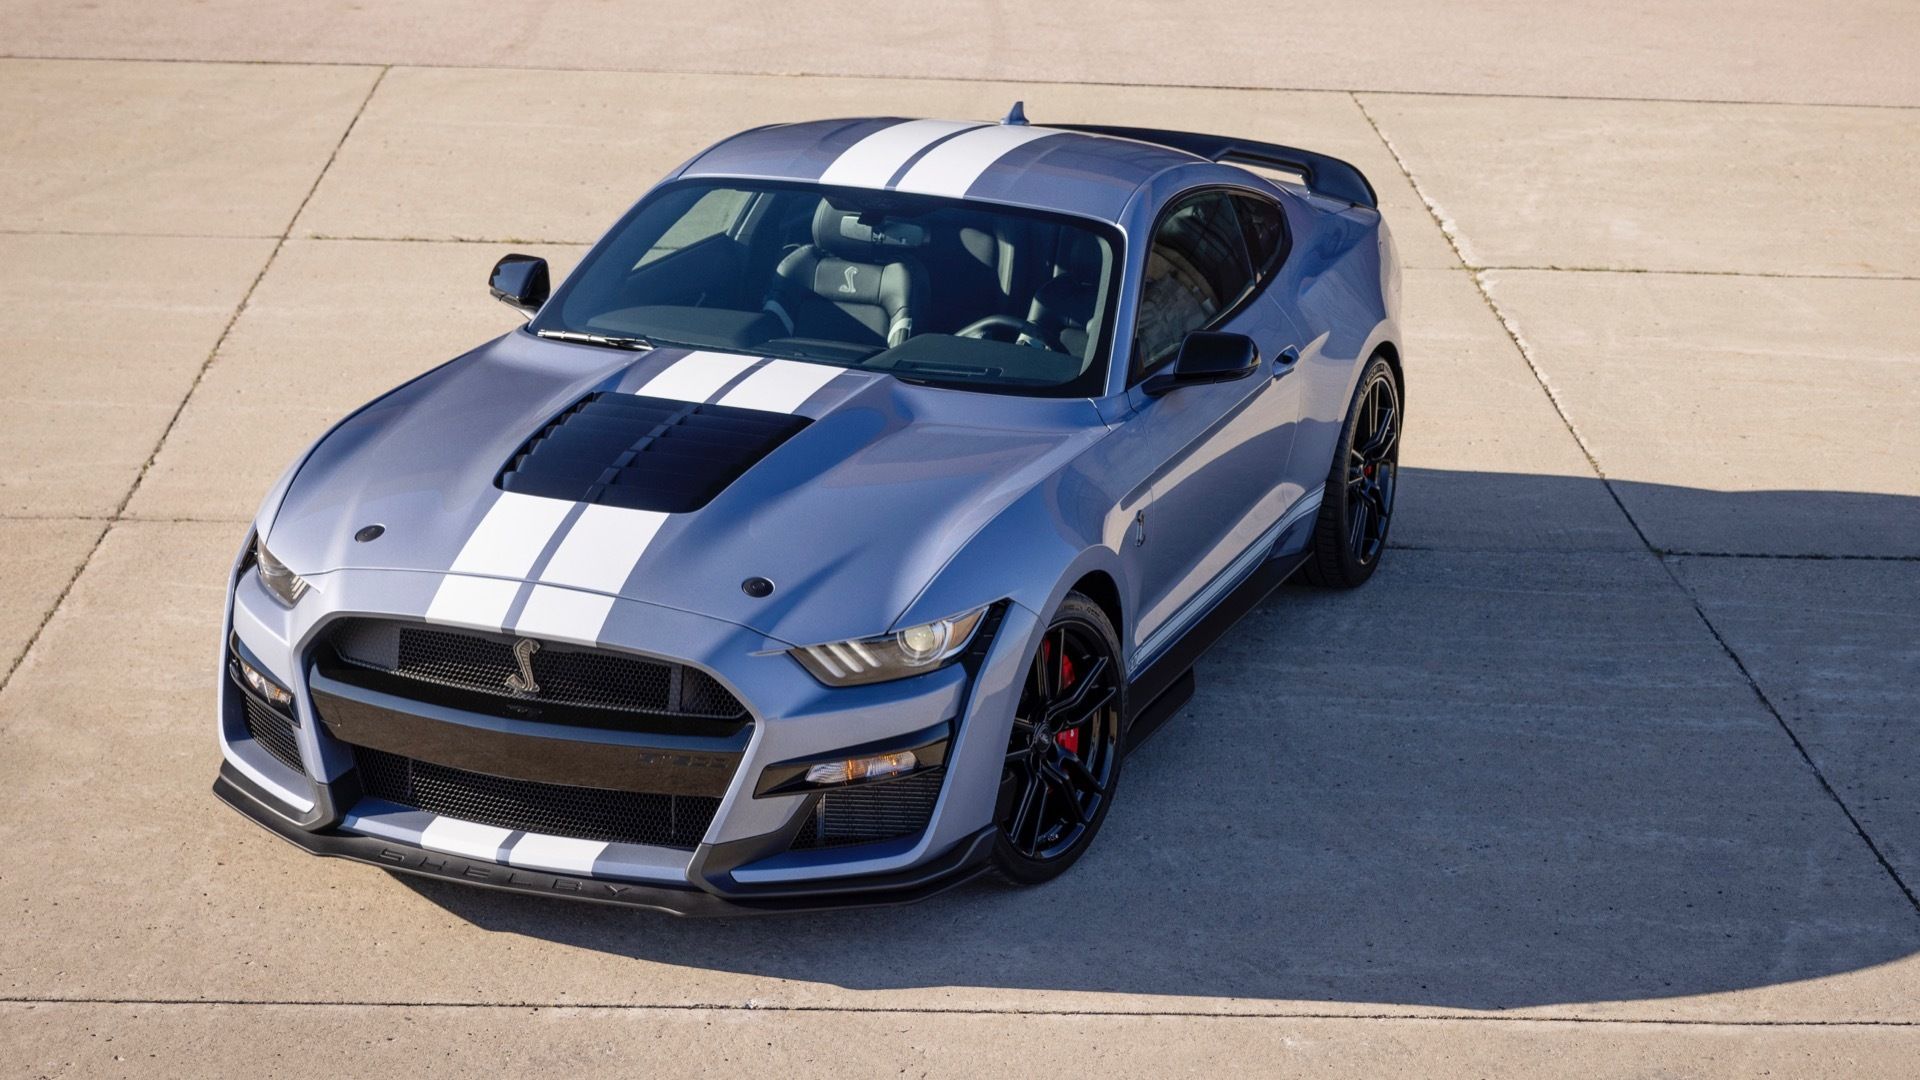 2022 Ford Mustang Shelby GT500, top view